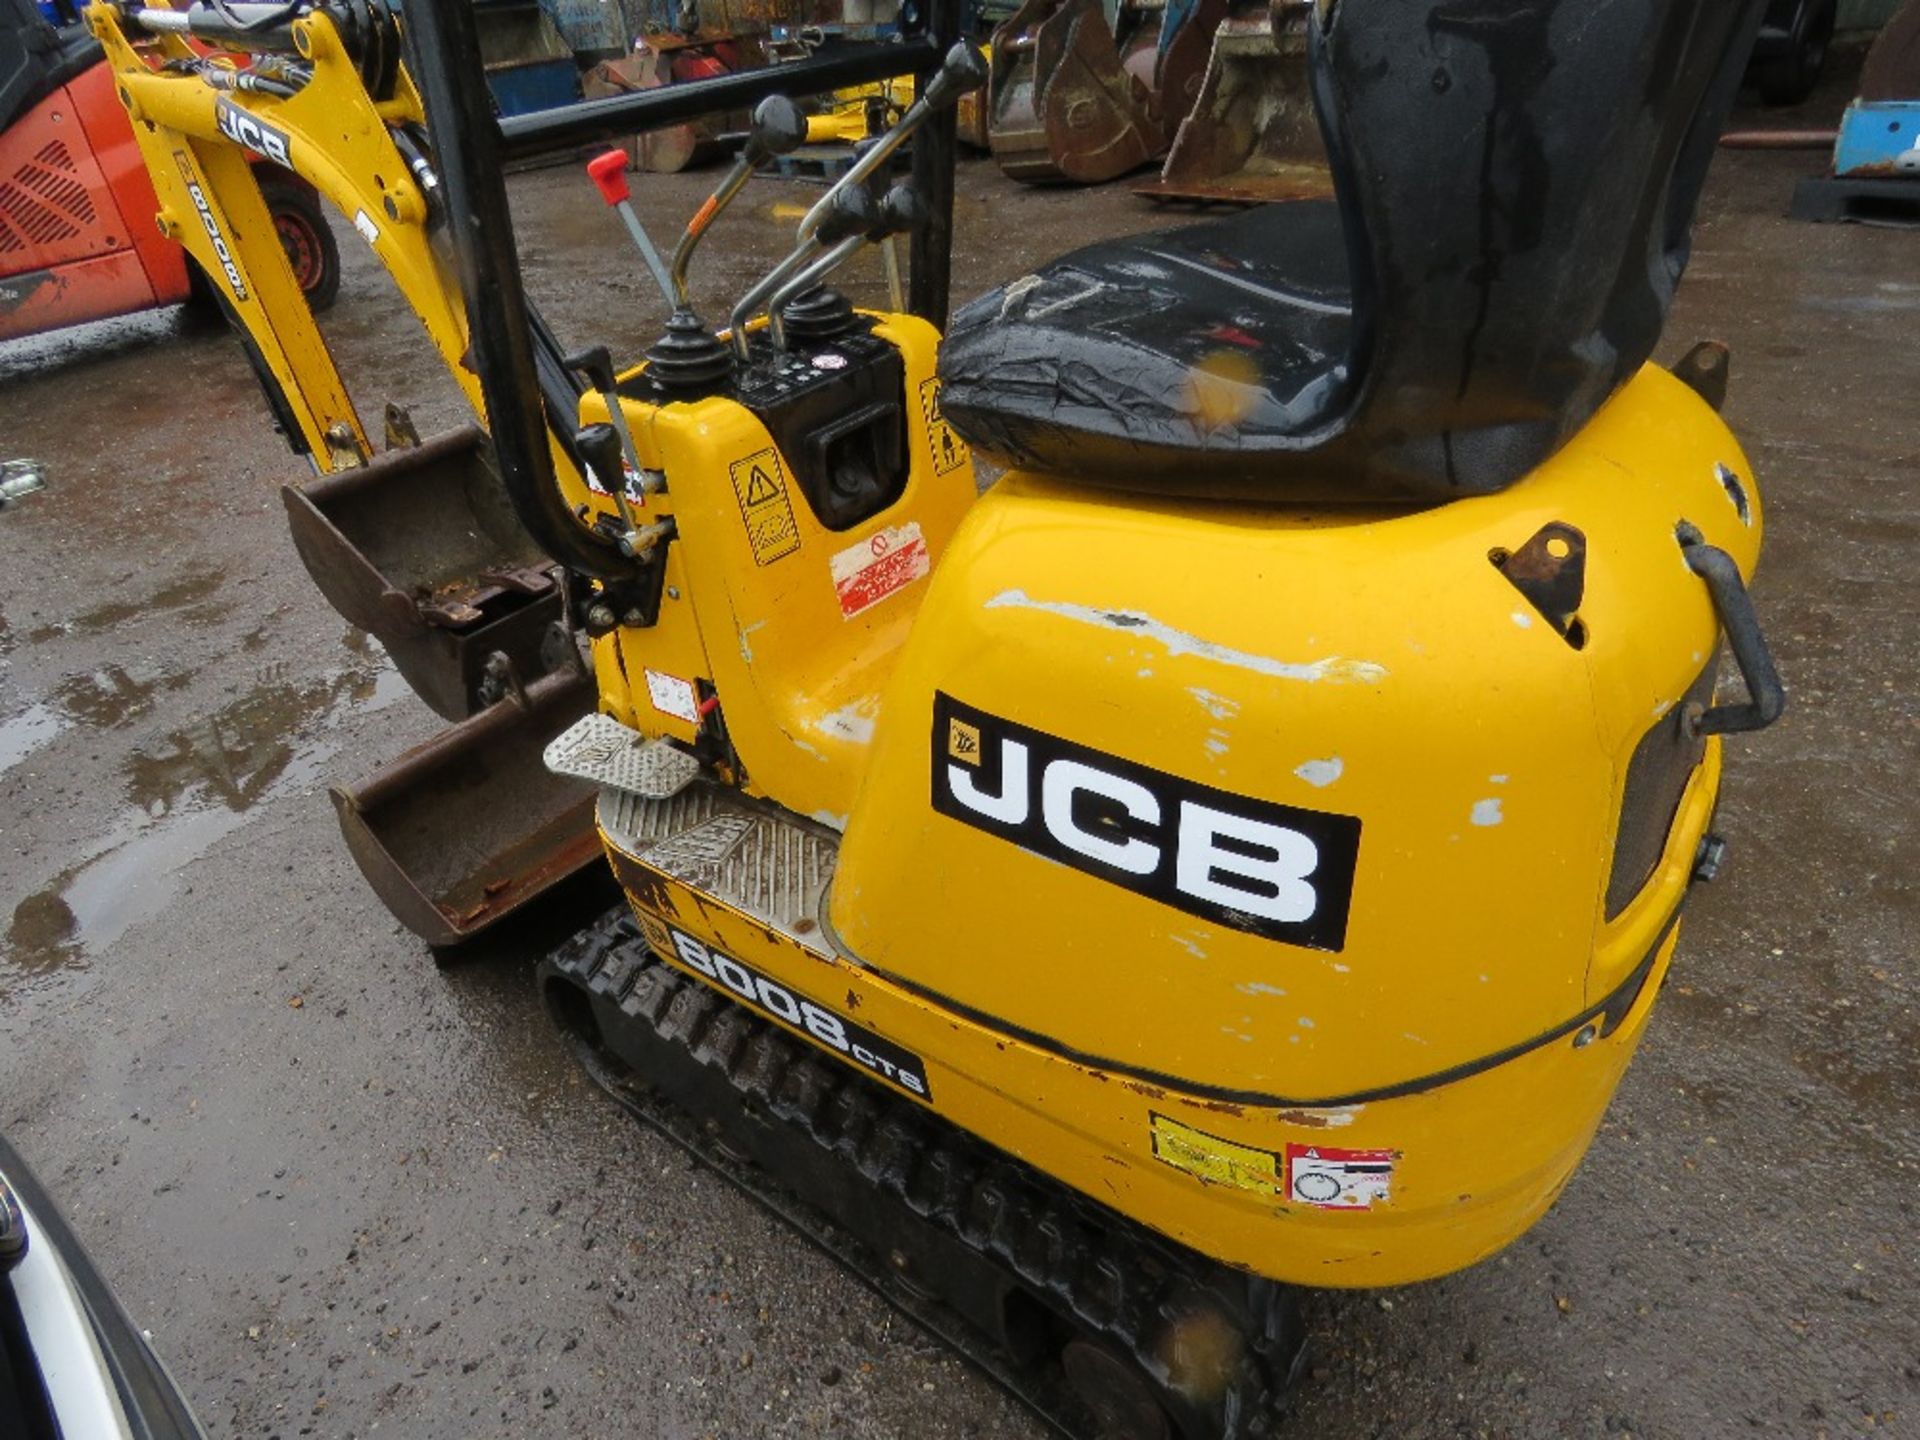 JCB 8008CTS MICRO EXCAVATOR YEAR 2019. 463 REC HOURS. 3 NO BUCKETS. needs some attention - Image 8 of 10